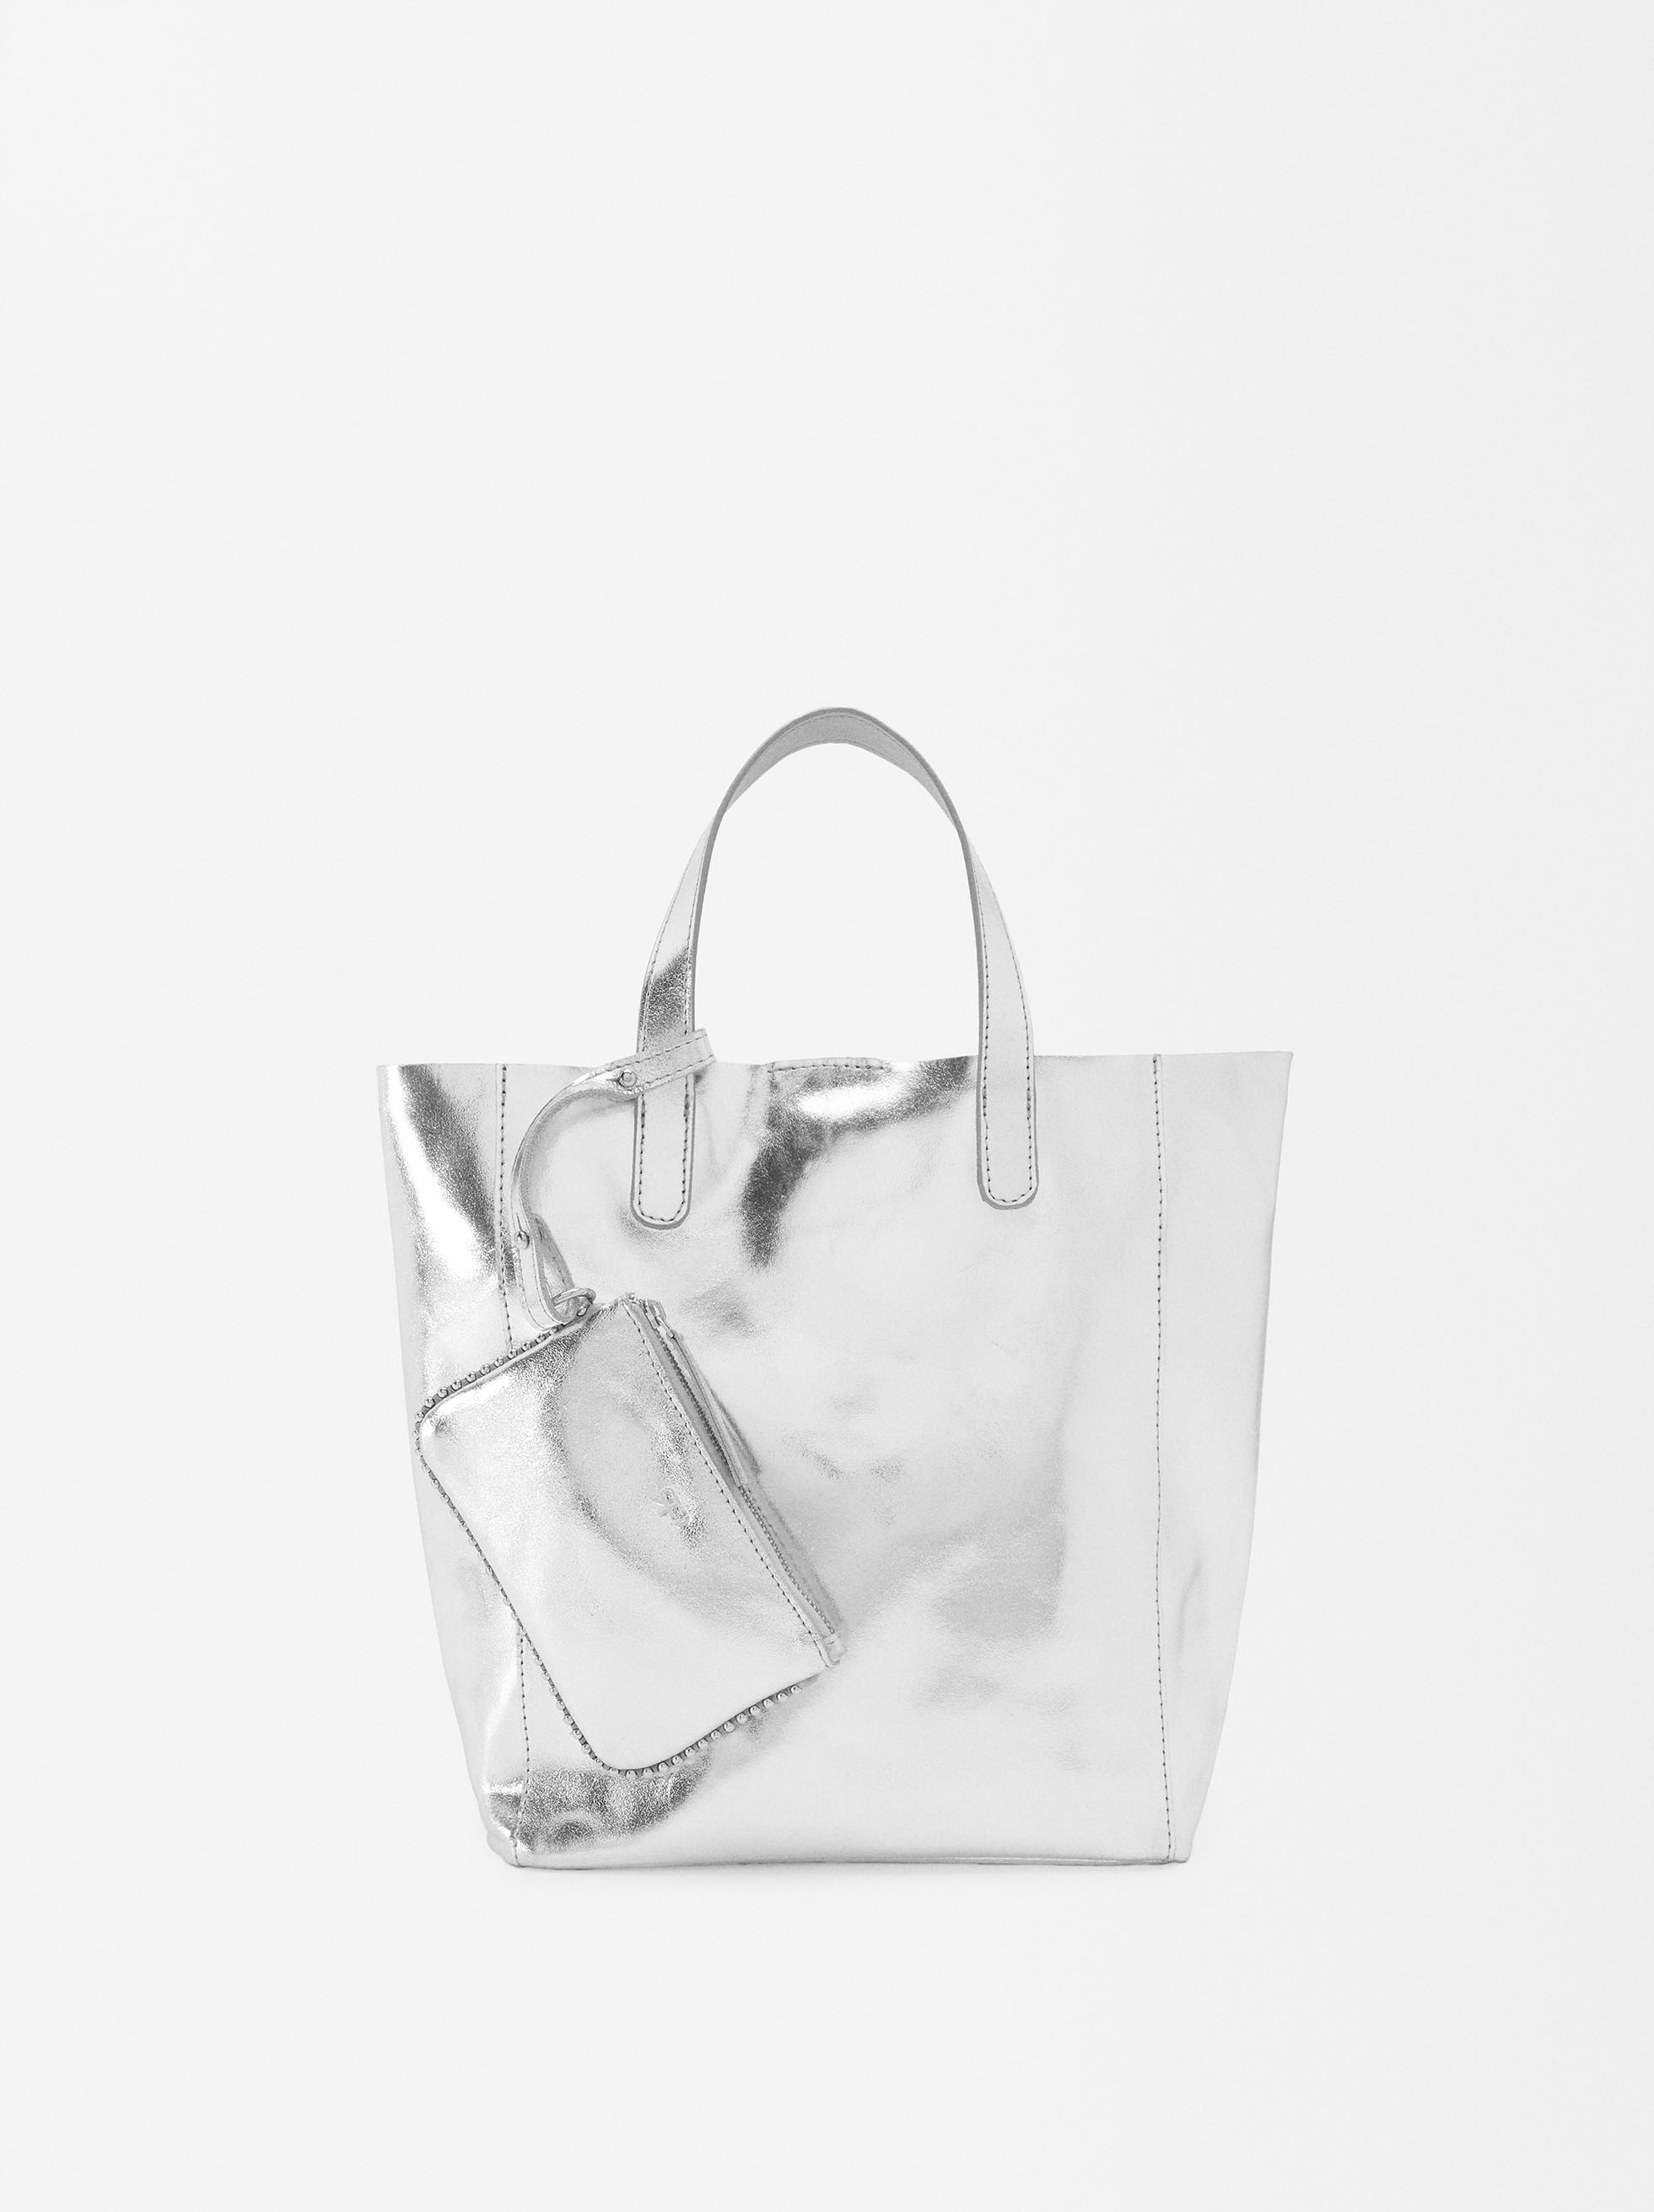 Metallic Leather Shopper Bag - Limited Edition image number 1.0